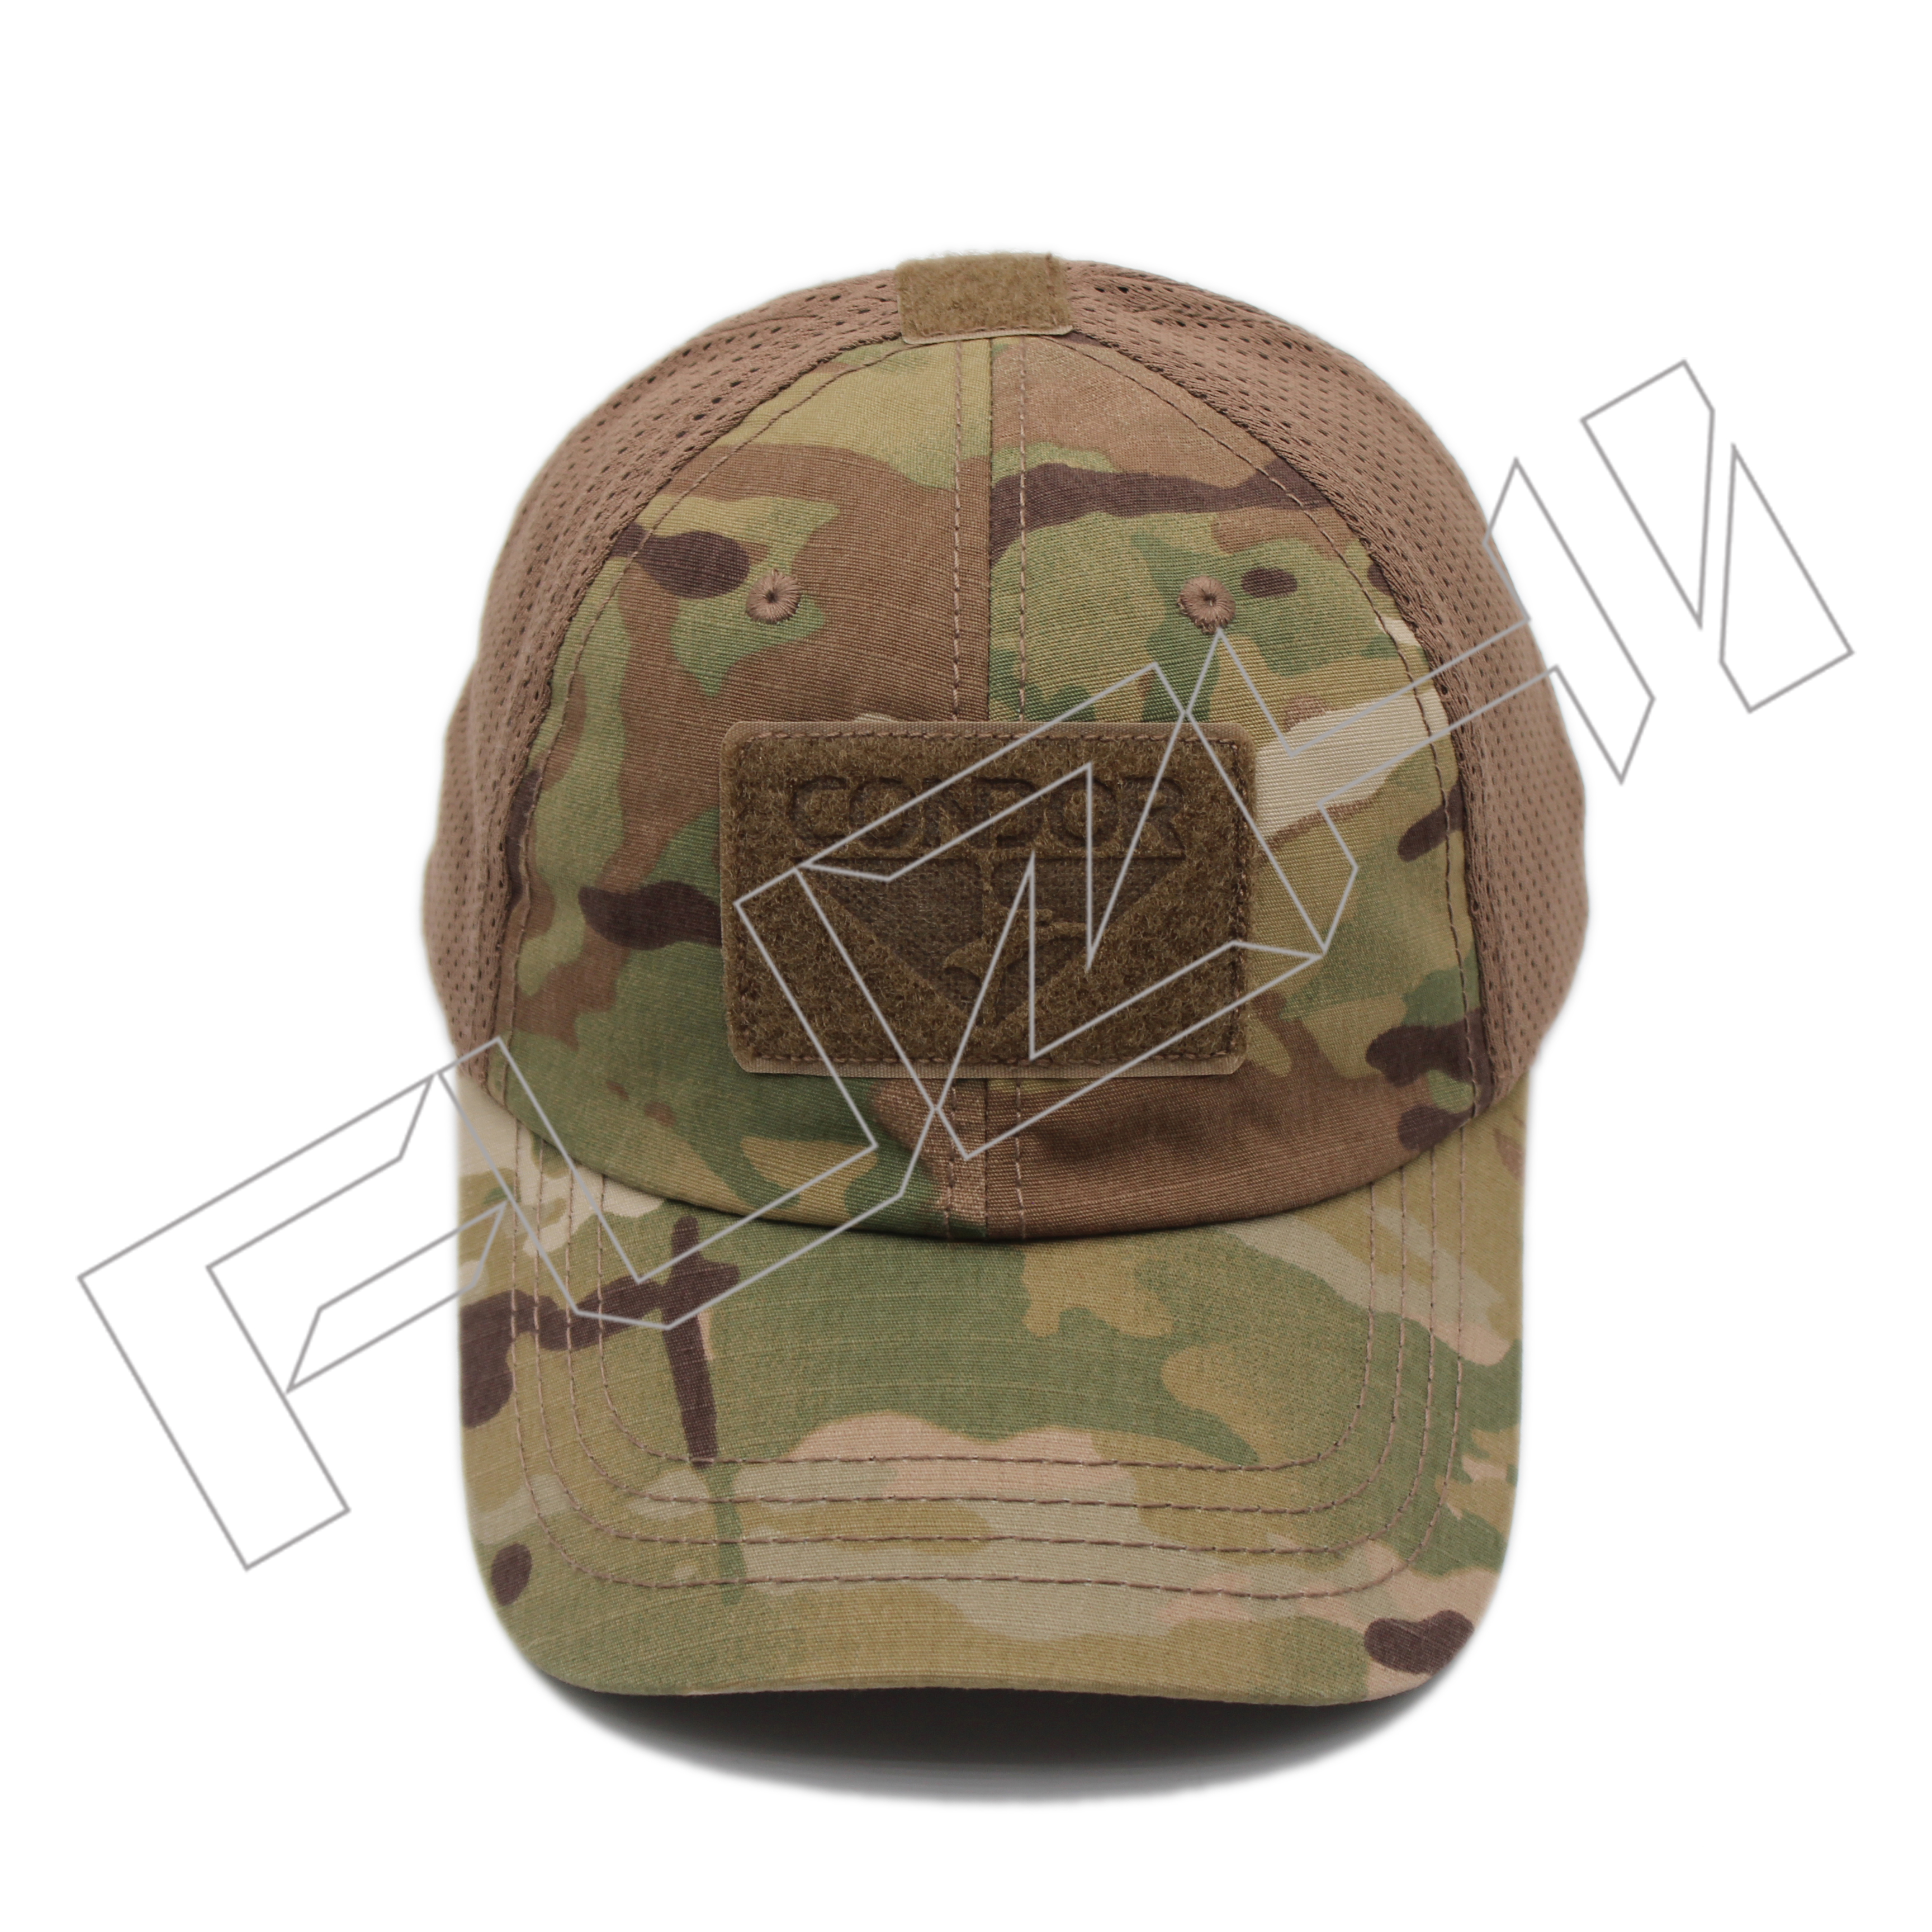 Camouflage Army trucker cap